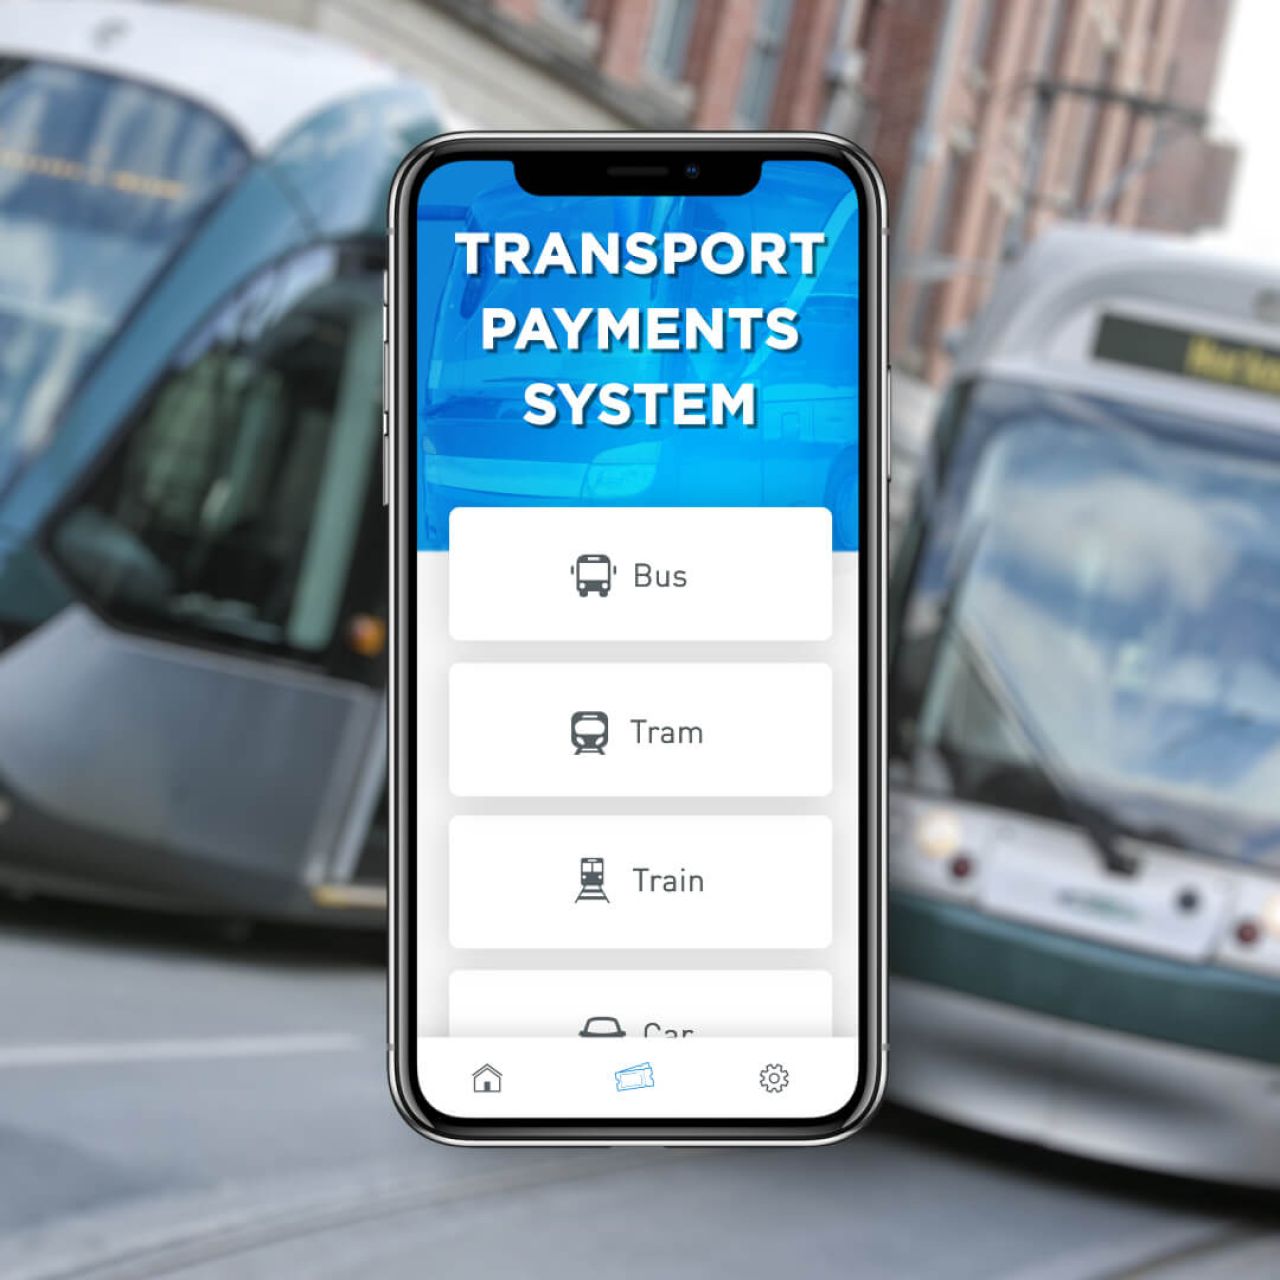 Transport Payment System - Types of transport